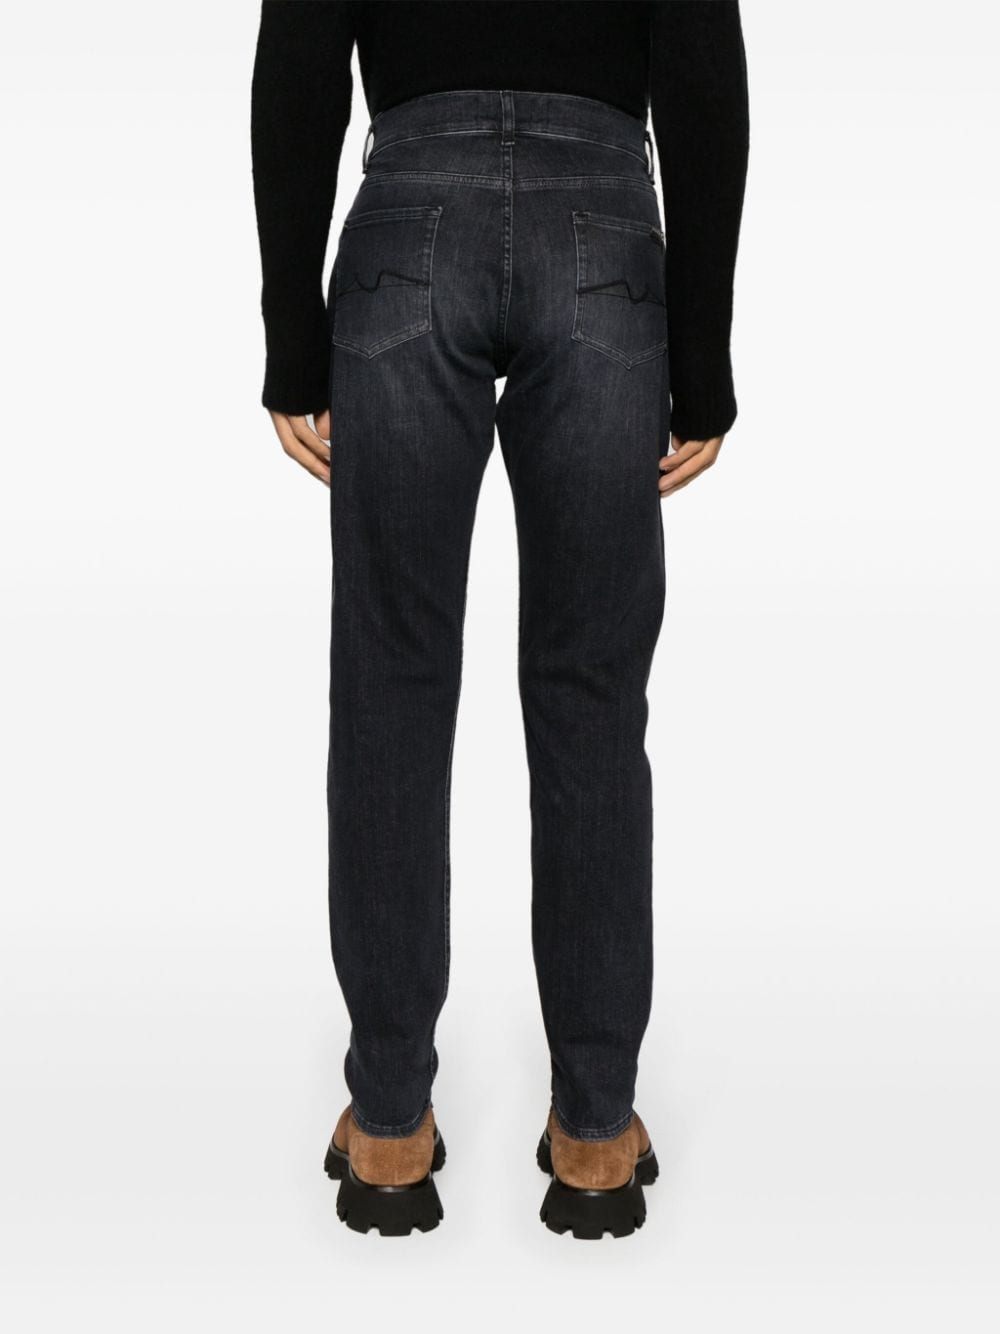 7 For All Mankind 7 FOR ALL MANKIND- Slimmy Tapered Jeans